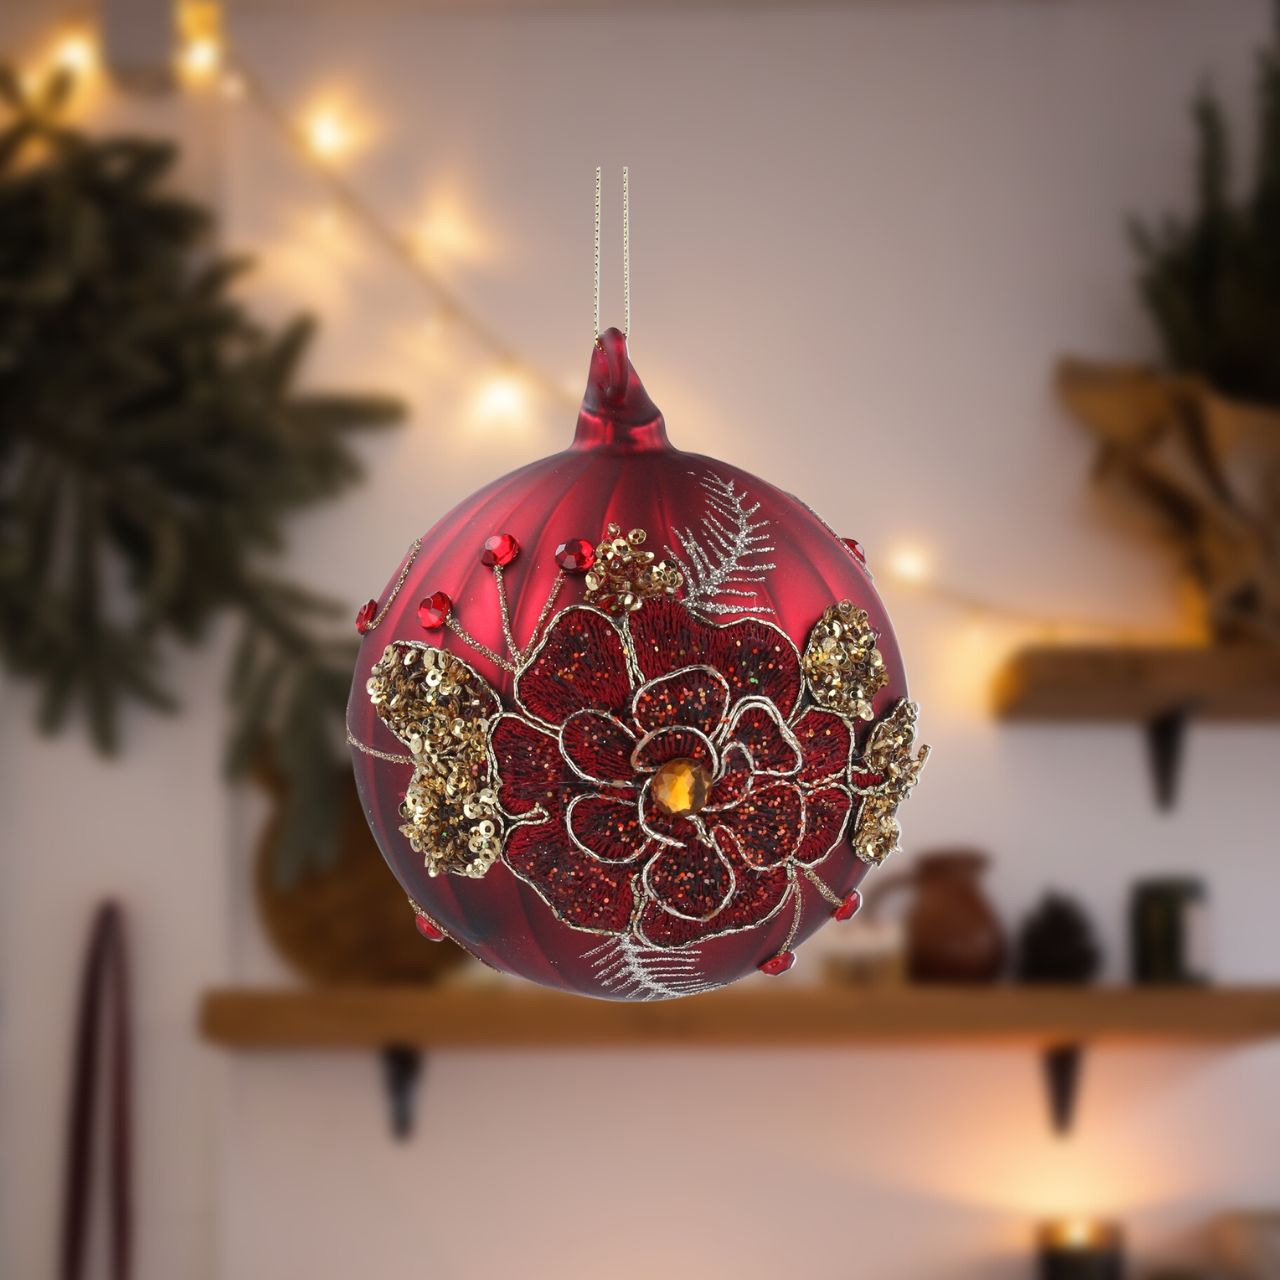 Gisela Graham Christmas Bauble Matt Burgundy With Embossed Flower & Leaves  Browse our beautiful range of luxury Christmas tree decorations, baubles & ornaments for your tree this Christmas.